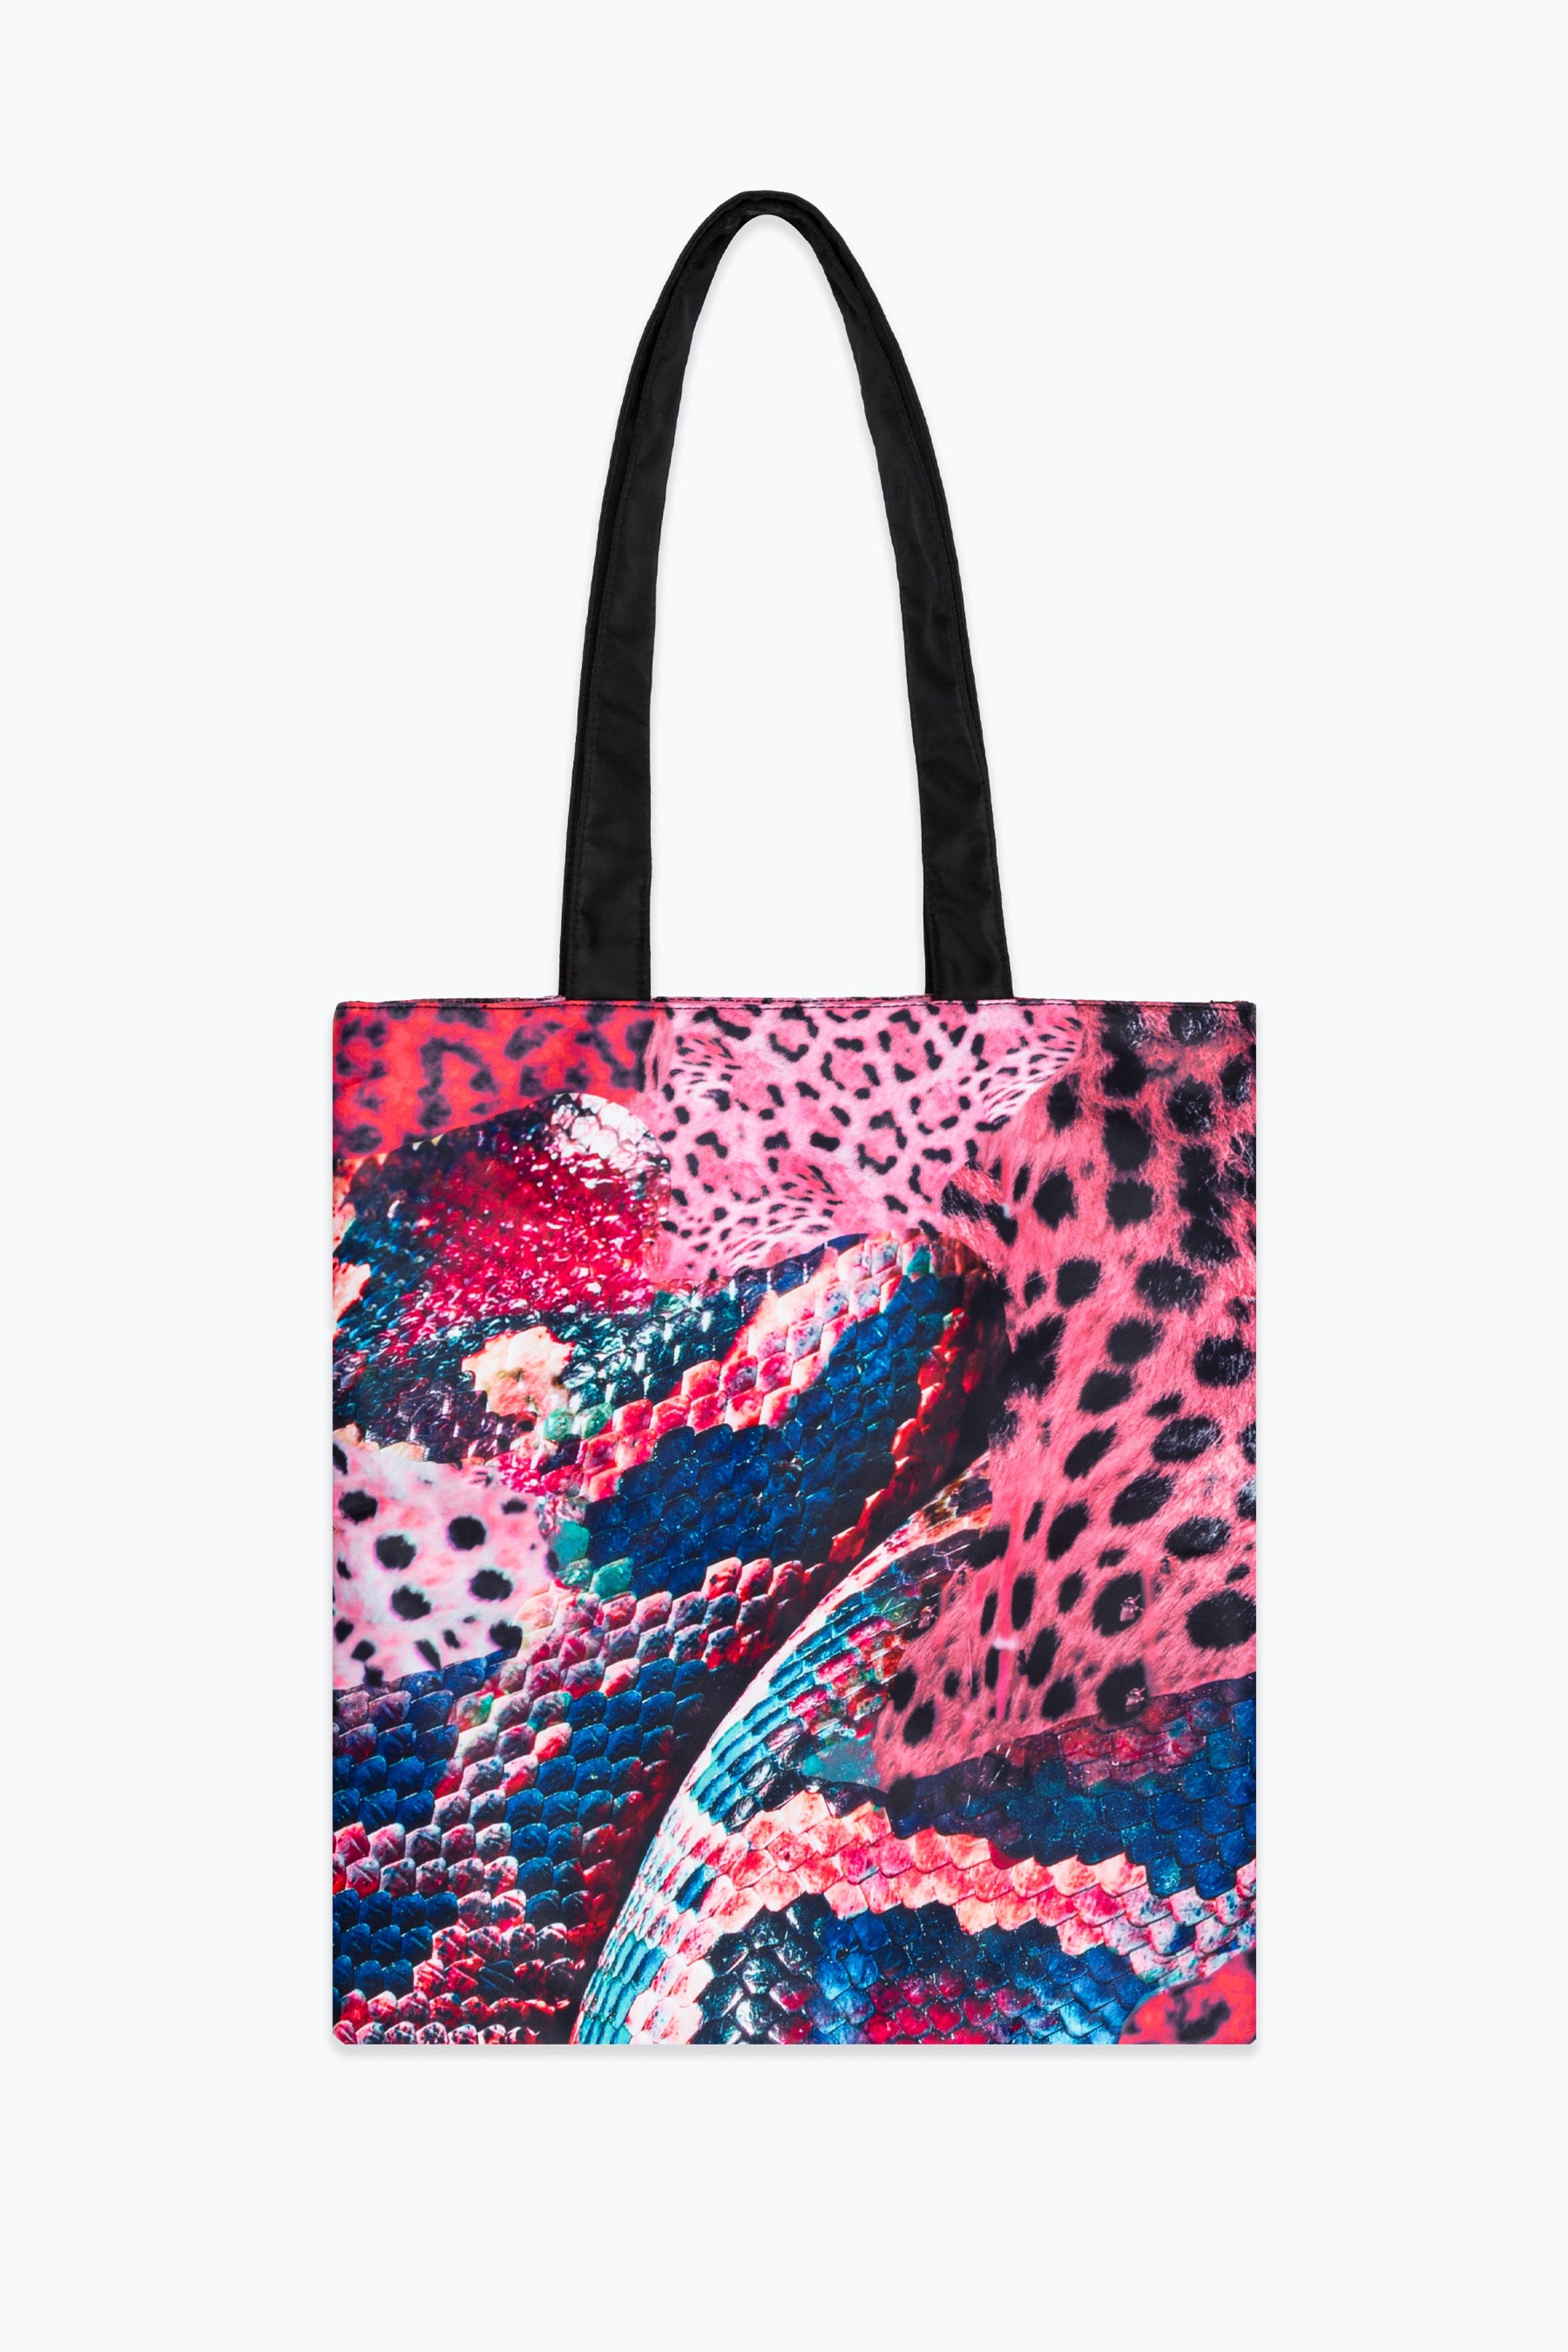 Alternate View 1 of HYPE SNAKE CAT JH TOTE BAG